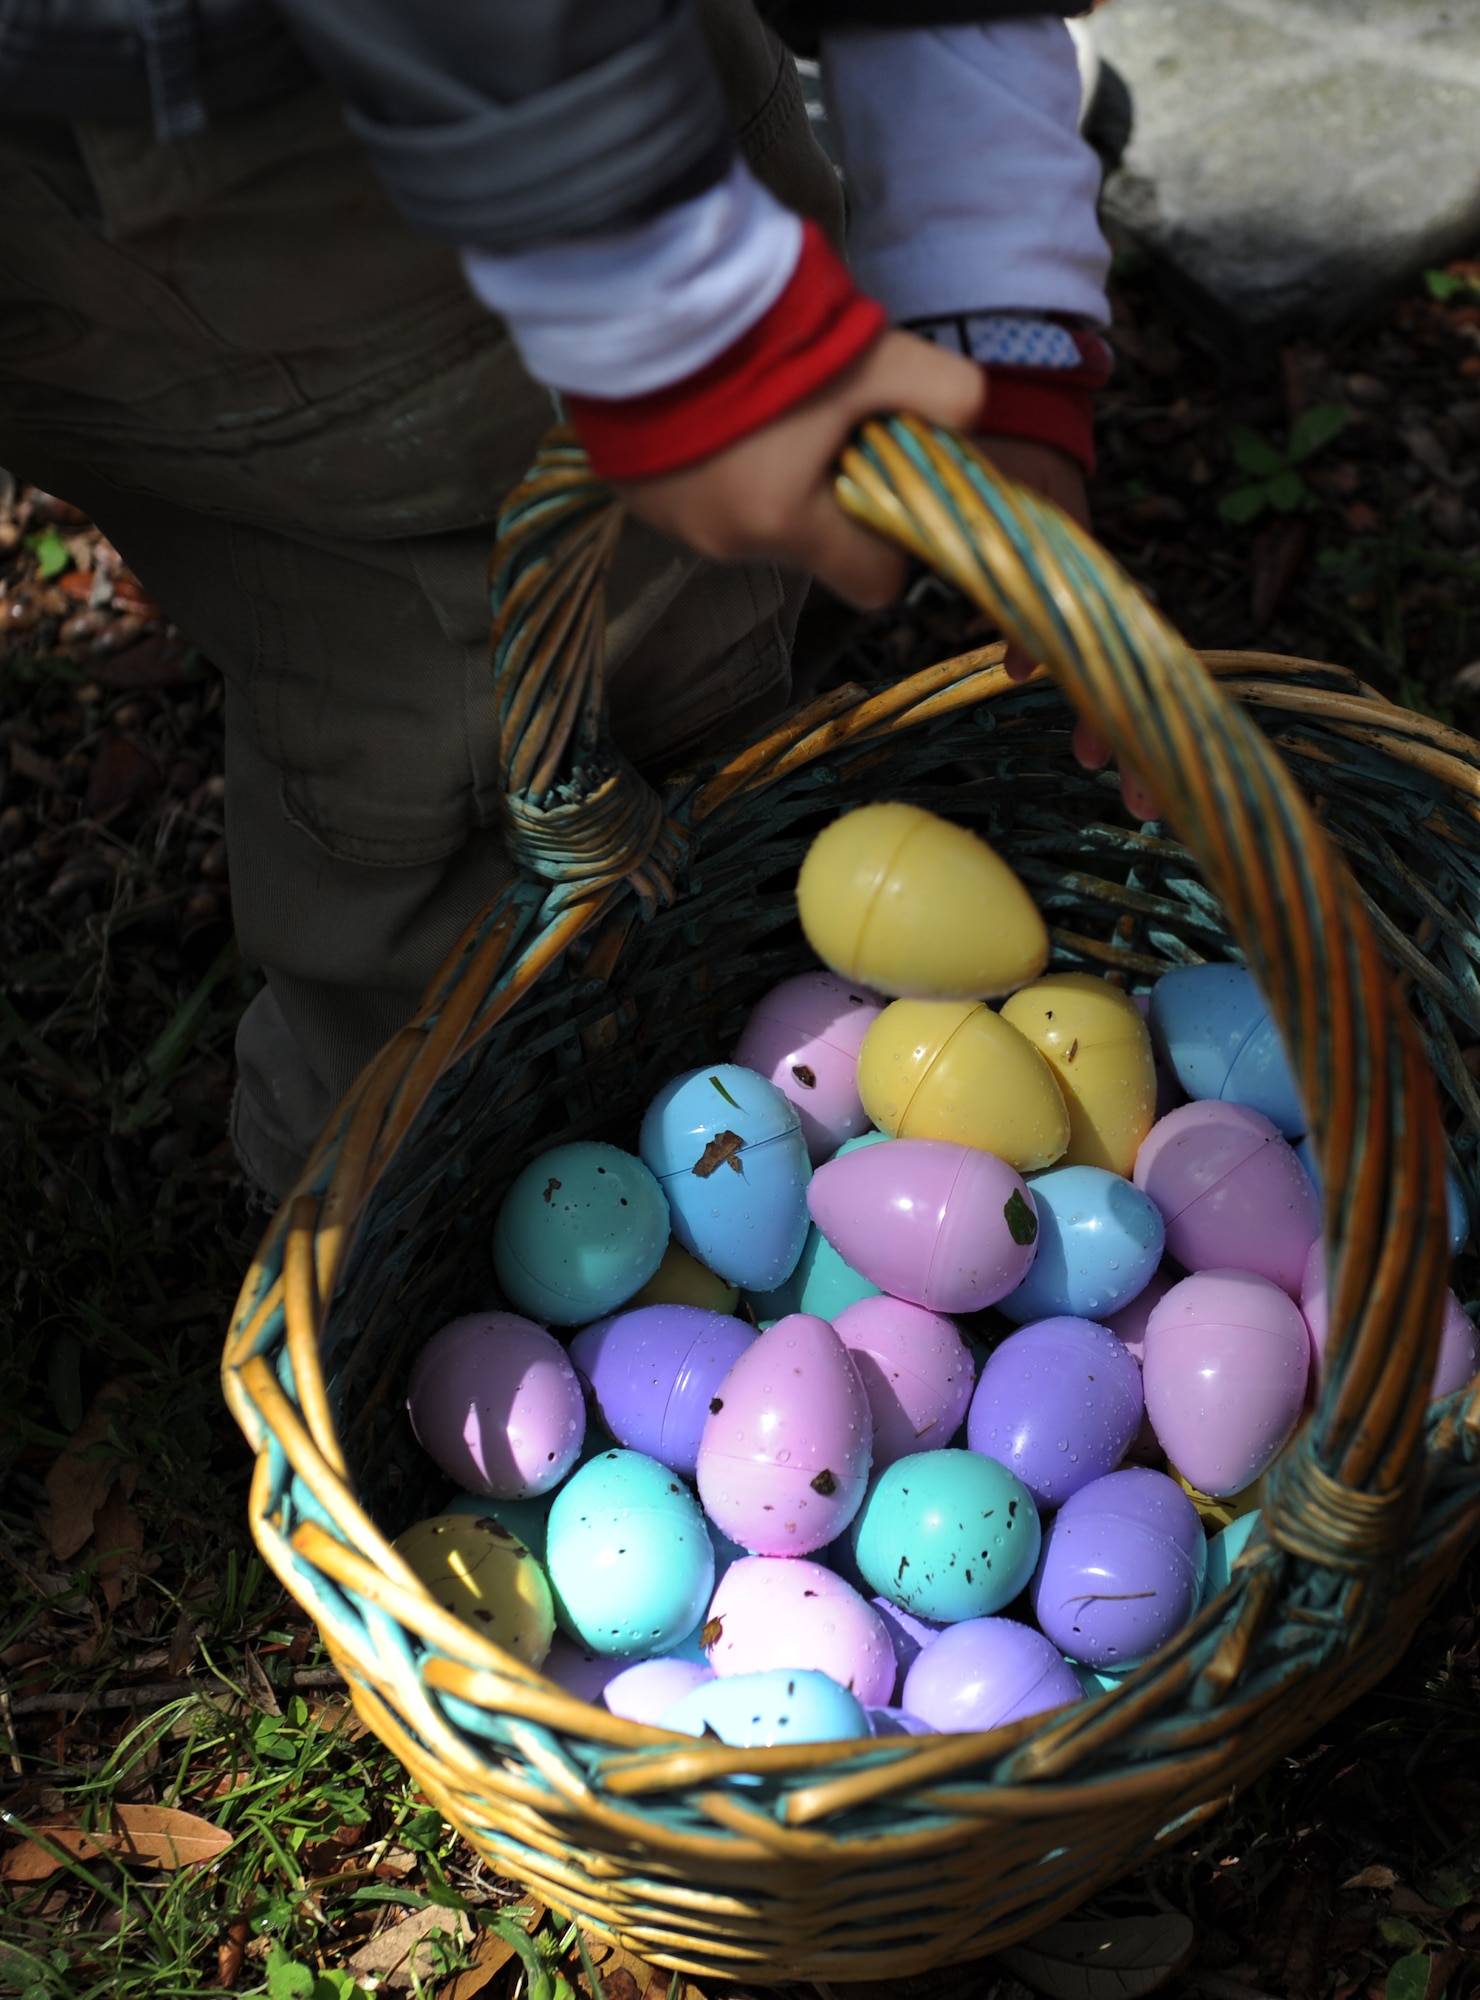 An Easter egg basket is carried during Easter in the Park’s egg hunt at the marina Mar. 26, 2016, Keesler Air Force Base, Miss. The event also included a youth fun run, arts and crafts, games and visits with the Easter Bunny. (U.S. Air Force photo by Kemberly Groue)